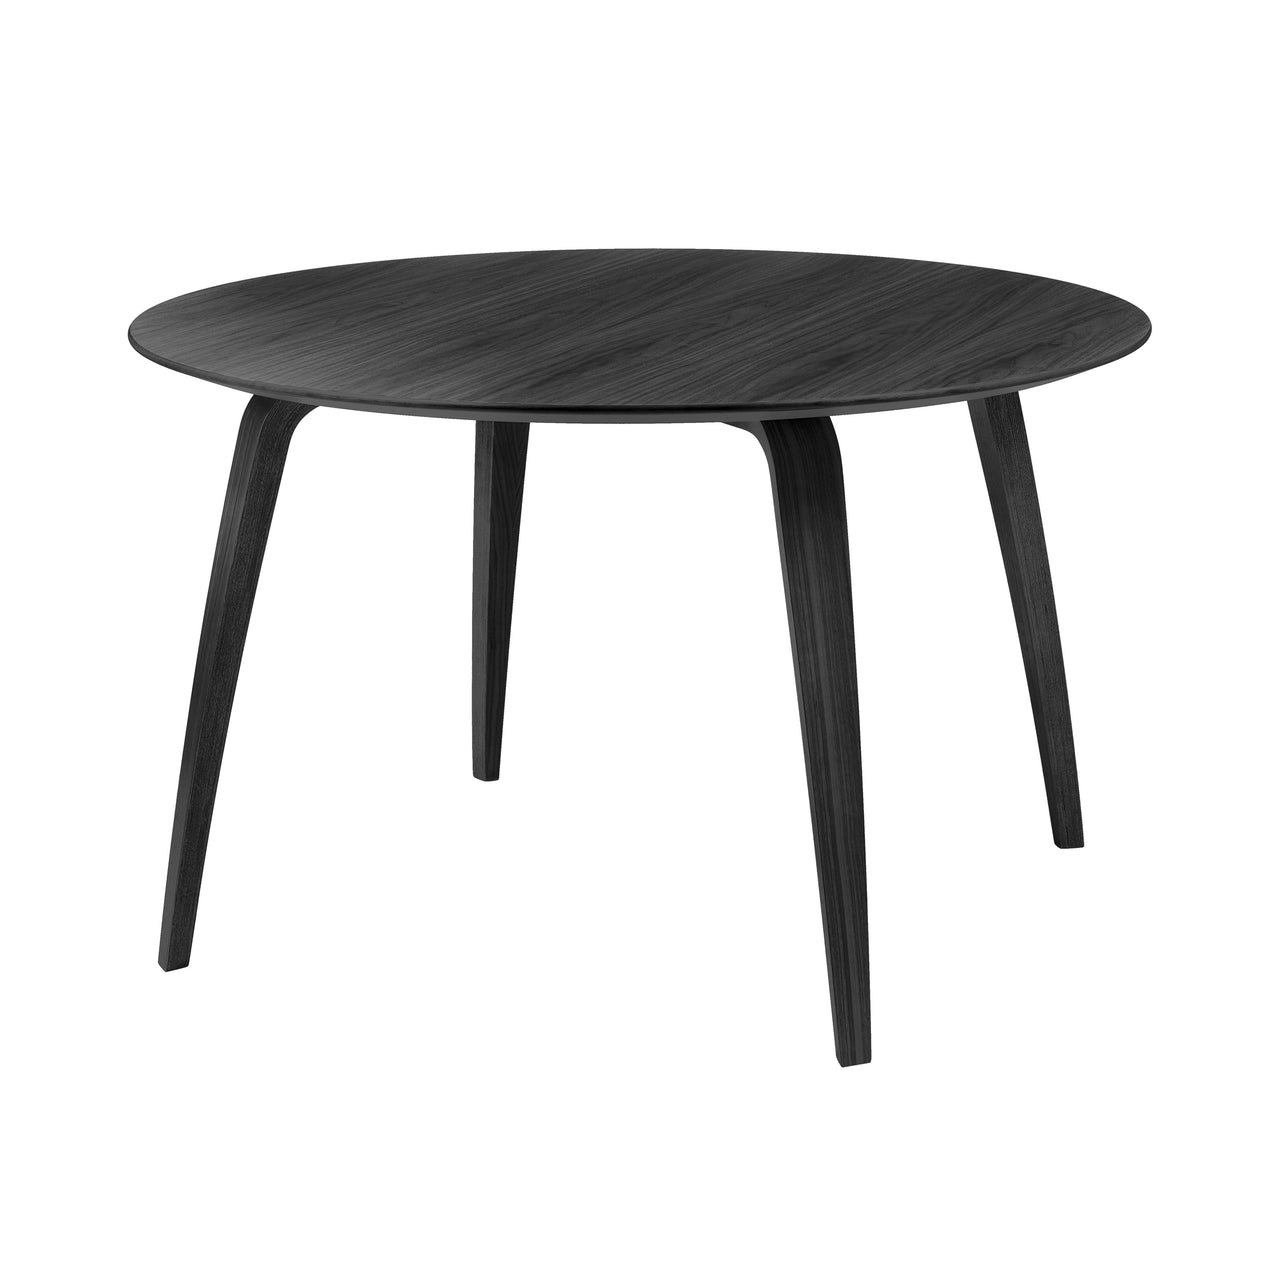 Gubi Dining Table: Round + Black Stained Ash